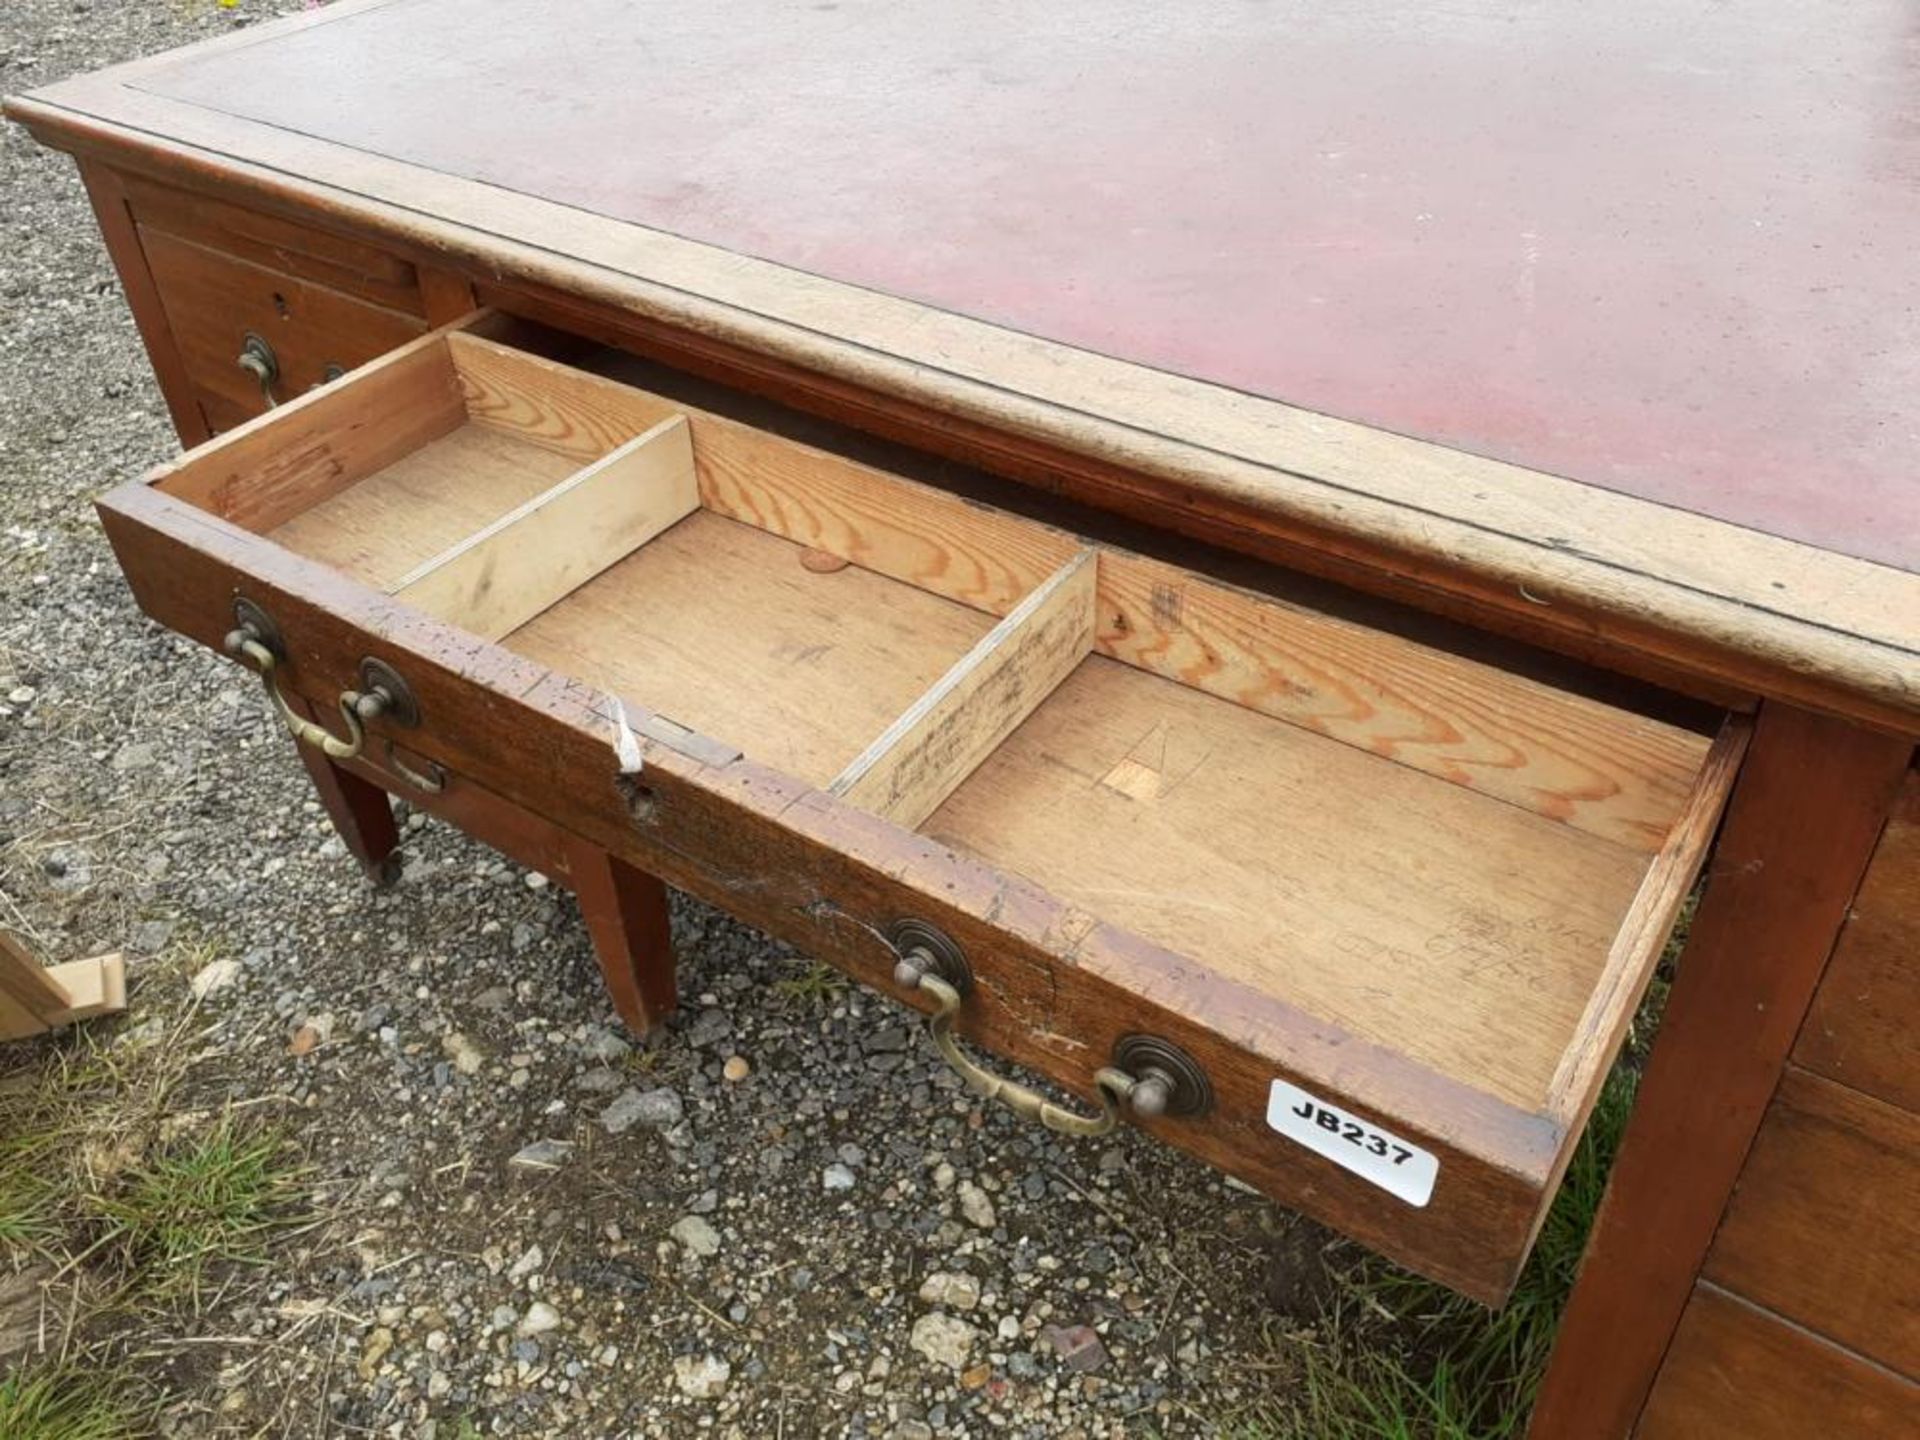 1 x Large Original Writing Desk With Leather Top Pad And Deep Drawers With Original Castors Under - Image 7 of 13